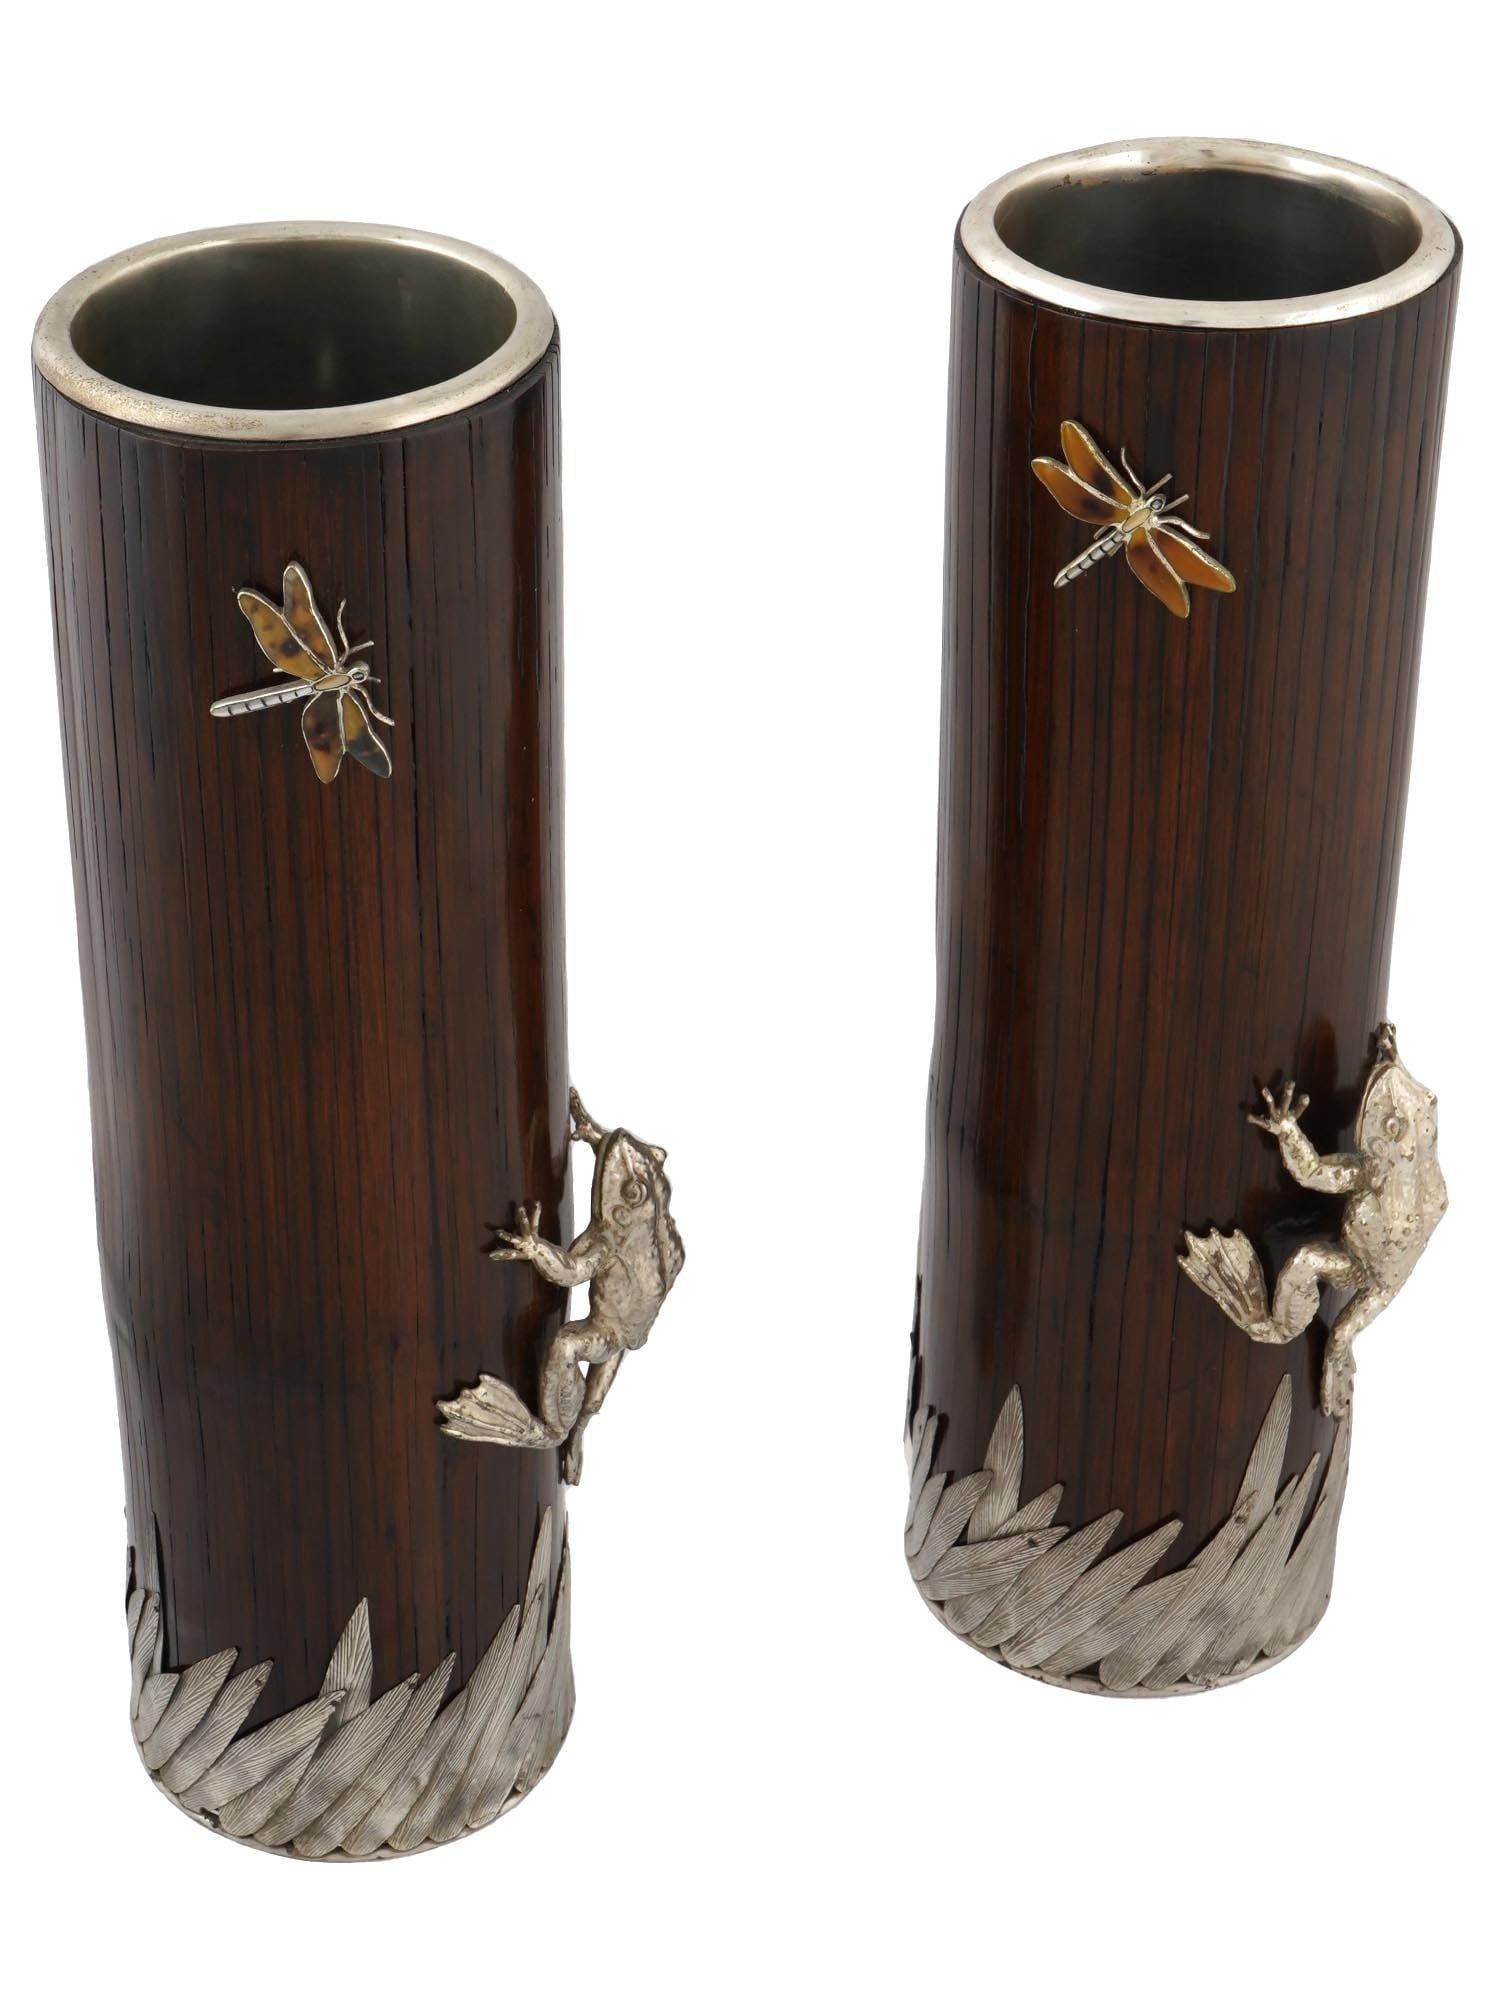 Pair of mid-century Japanese vases crafted from bamboo wood, Showa era, circa  1970s, with silvered bronze figures of frogs and enameled  dragonflies.